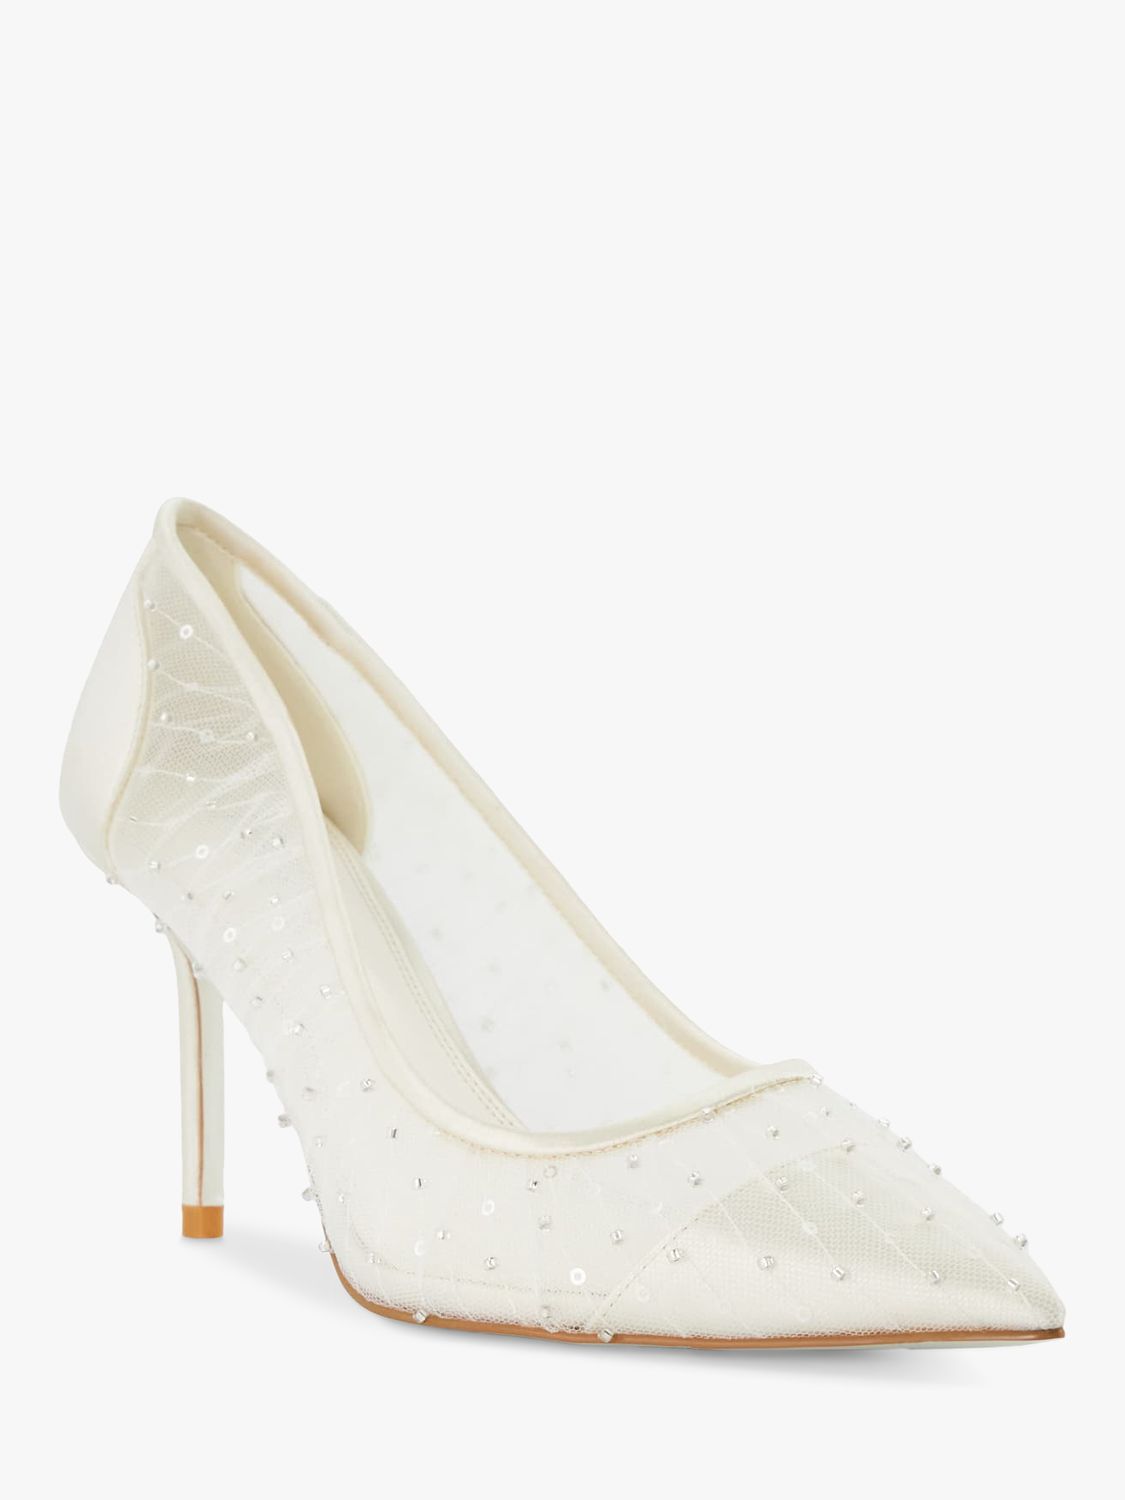 Buy Dune Bridal Collection Bespoke Embellished Pleated Mesh High Heel Court Shoes, Ivory Online at johnlewis.com